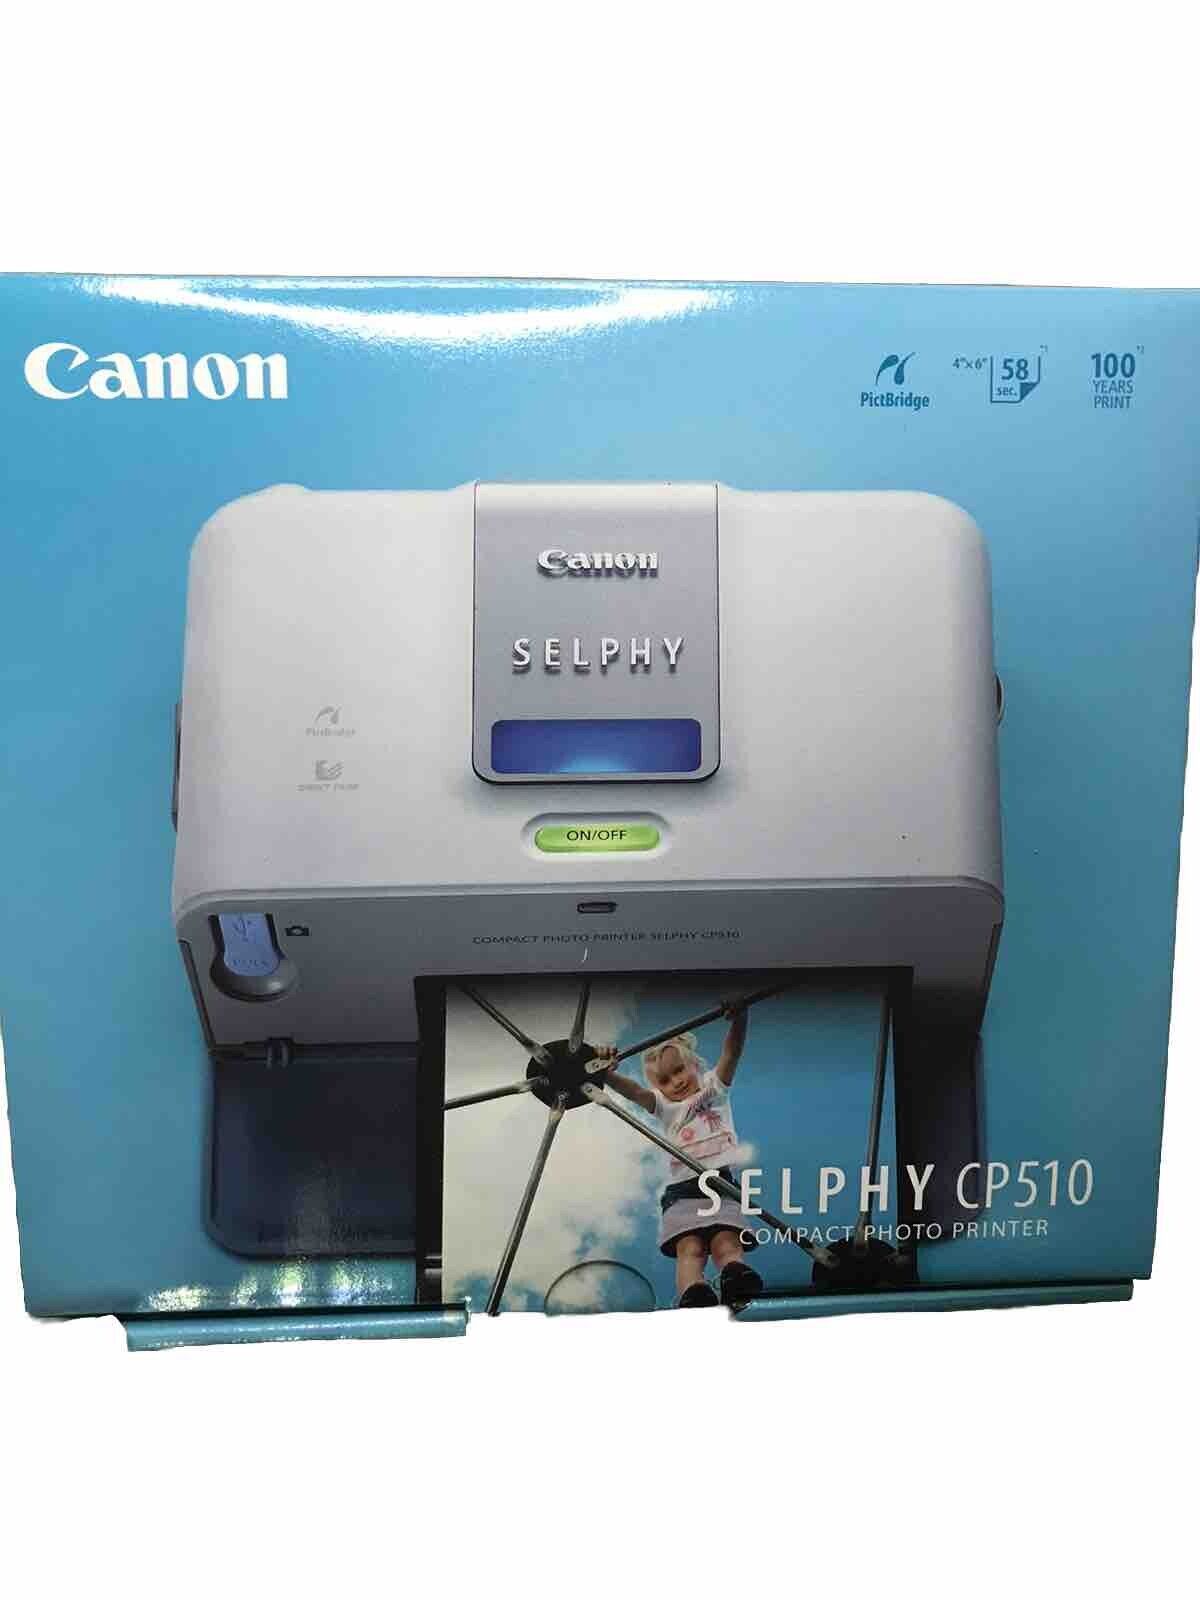 Canon SELPHY CP510 Digital Photo Thermal Printer For Canon Camera Brand New